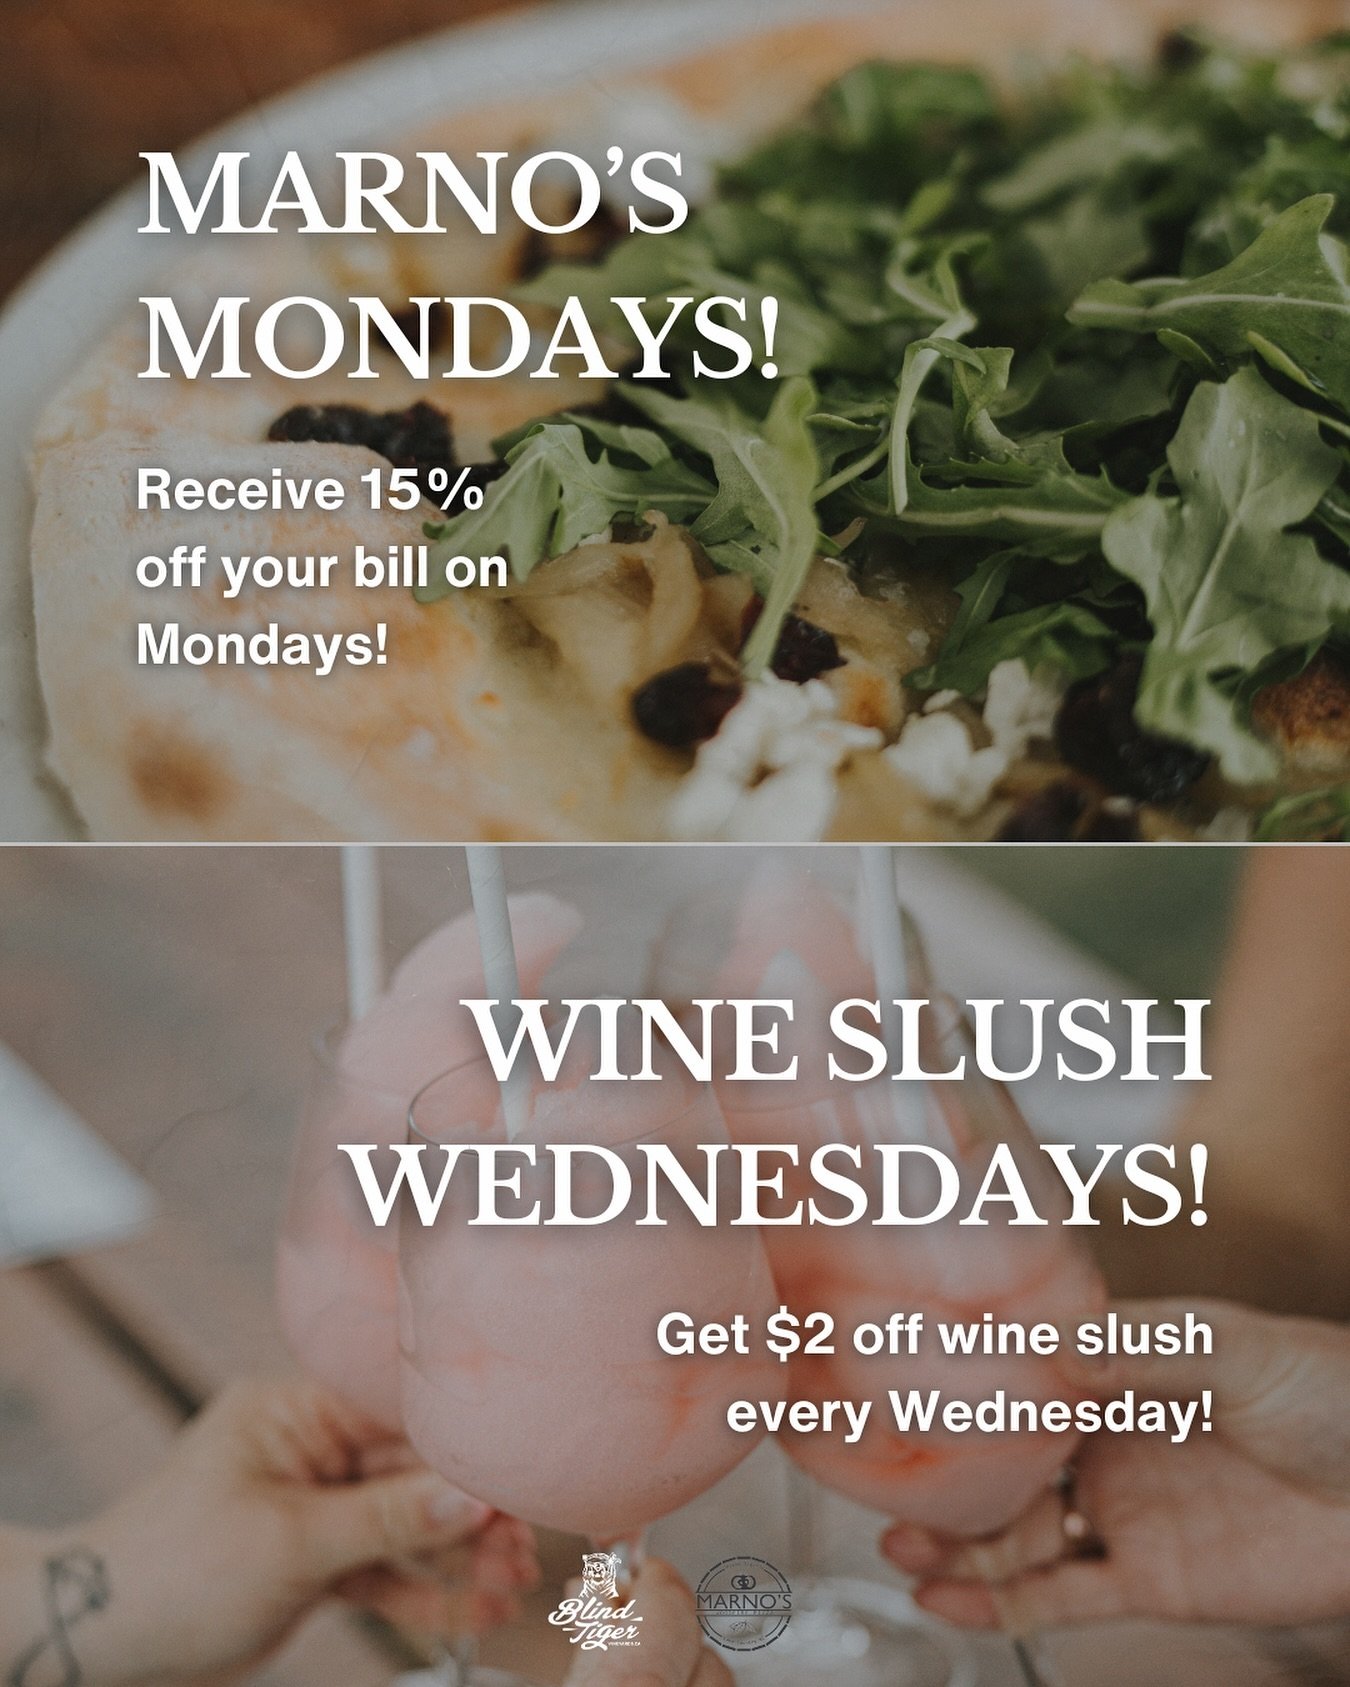 Okay after the heat we felt this past weekend it&rsquo;s safe to say that summer is on it&rsquo;s way!  And we&rsquo;ve got some awesome new promos for this summer season! 🤗

We are so excited about Marno&rsquo;s Mondays where guests will receive 15